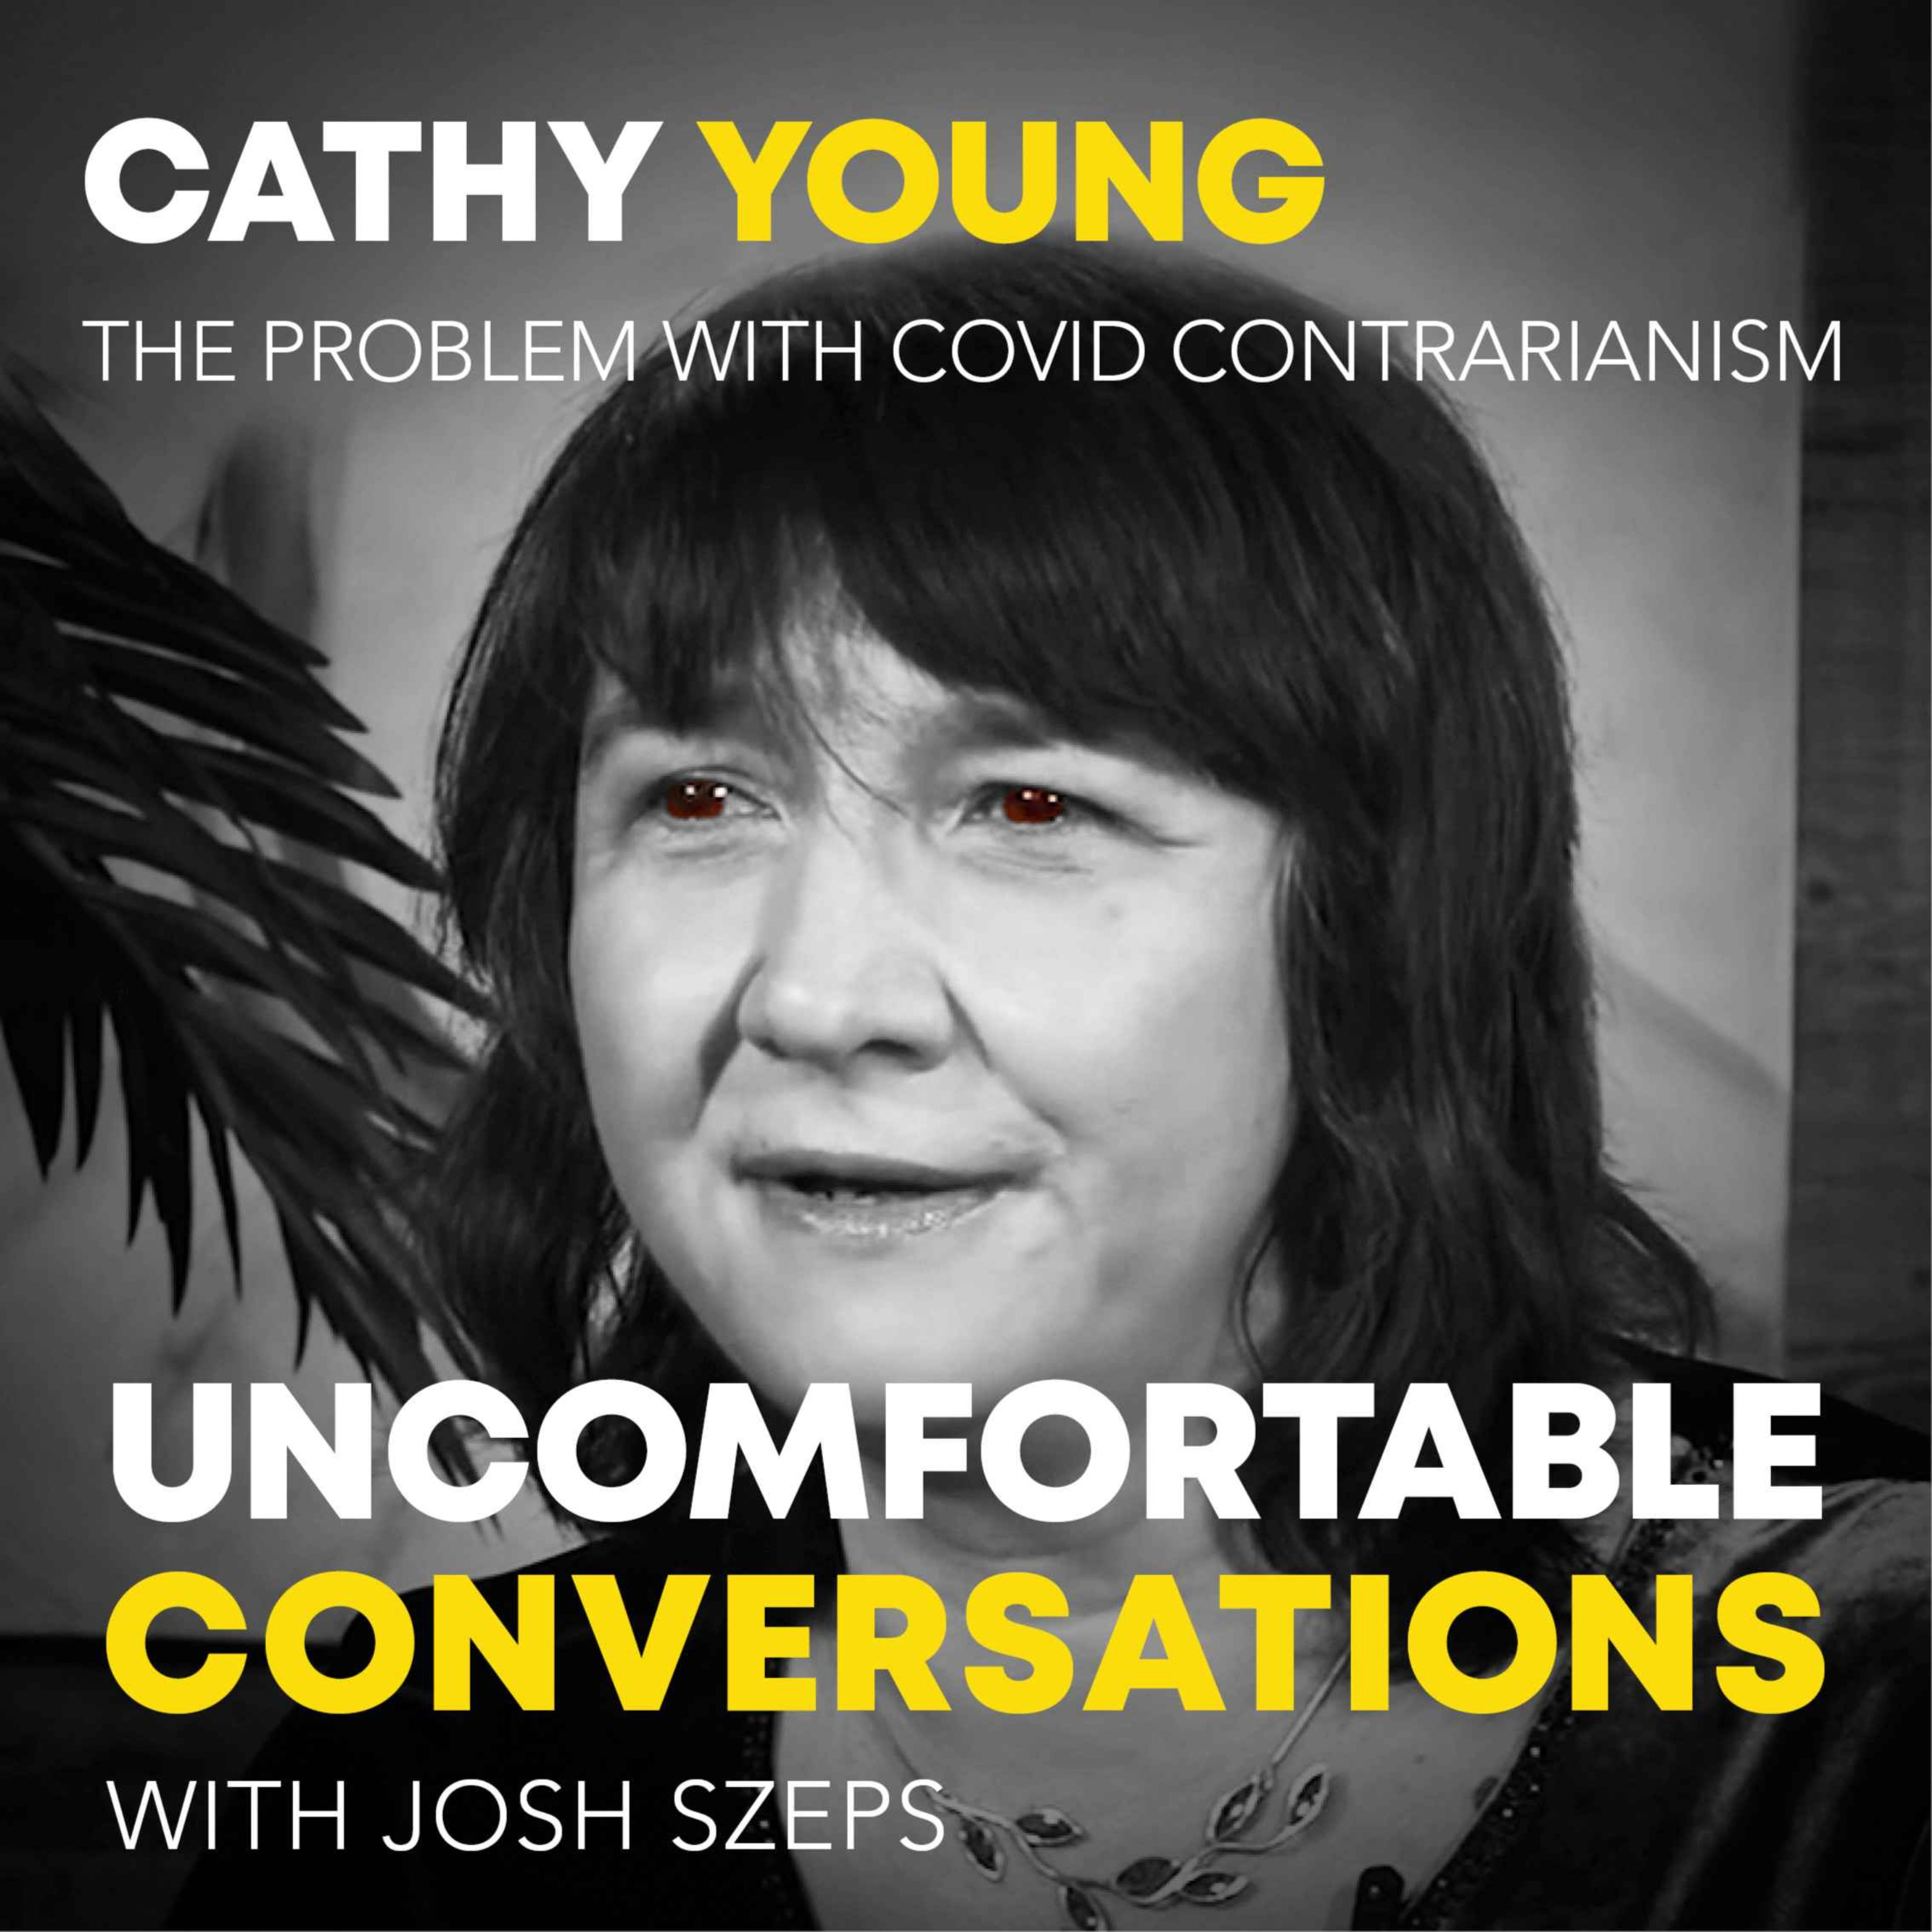 "The Problem With Covid Contrarianism" with Cathy Young